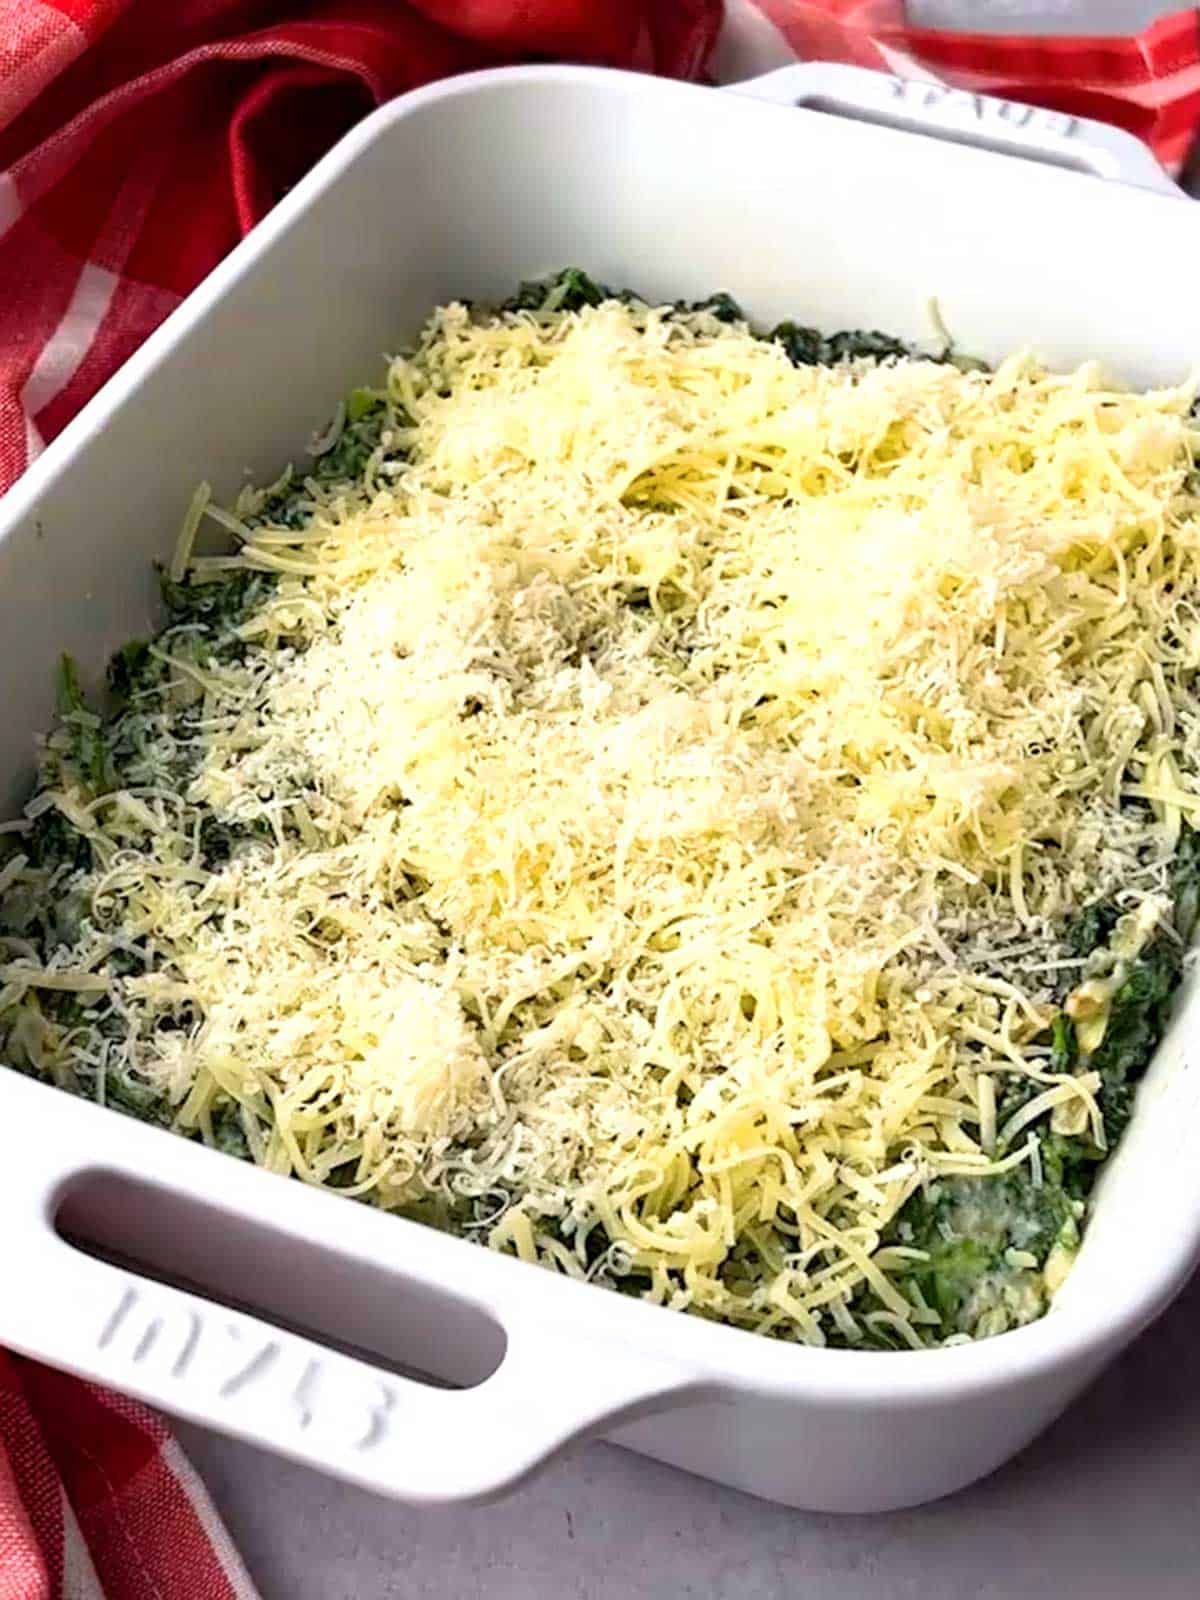 Cheese sprinkled on top of spinach gratin in casserole dish.